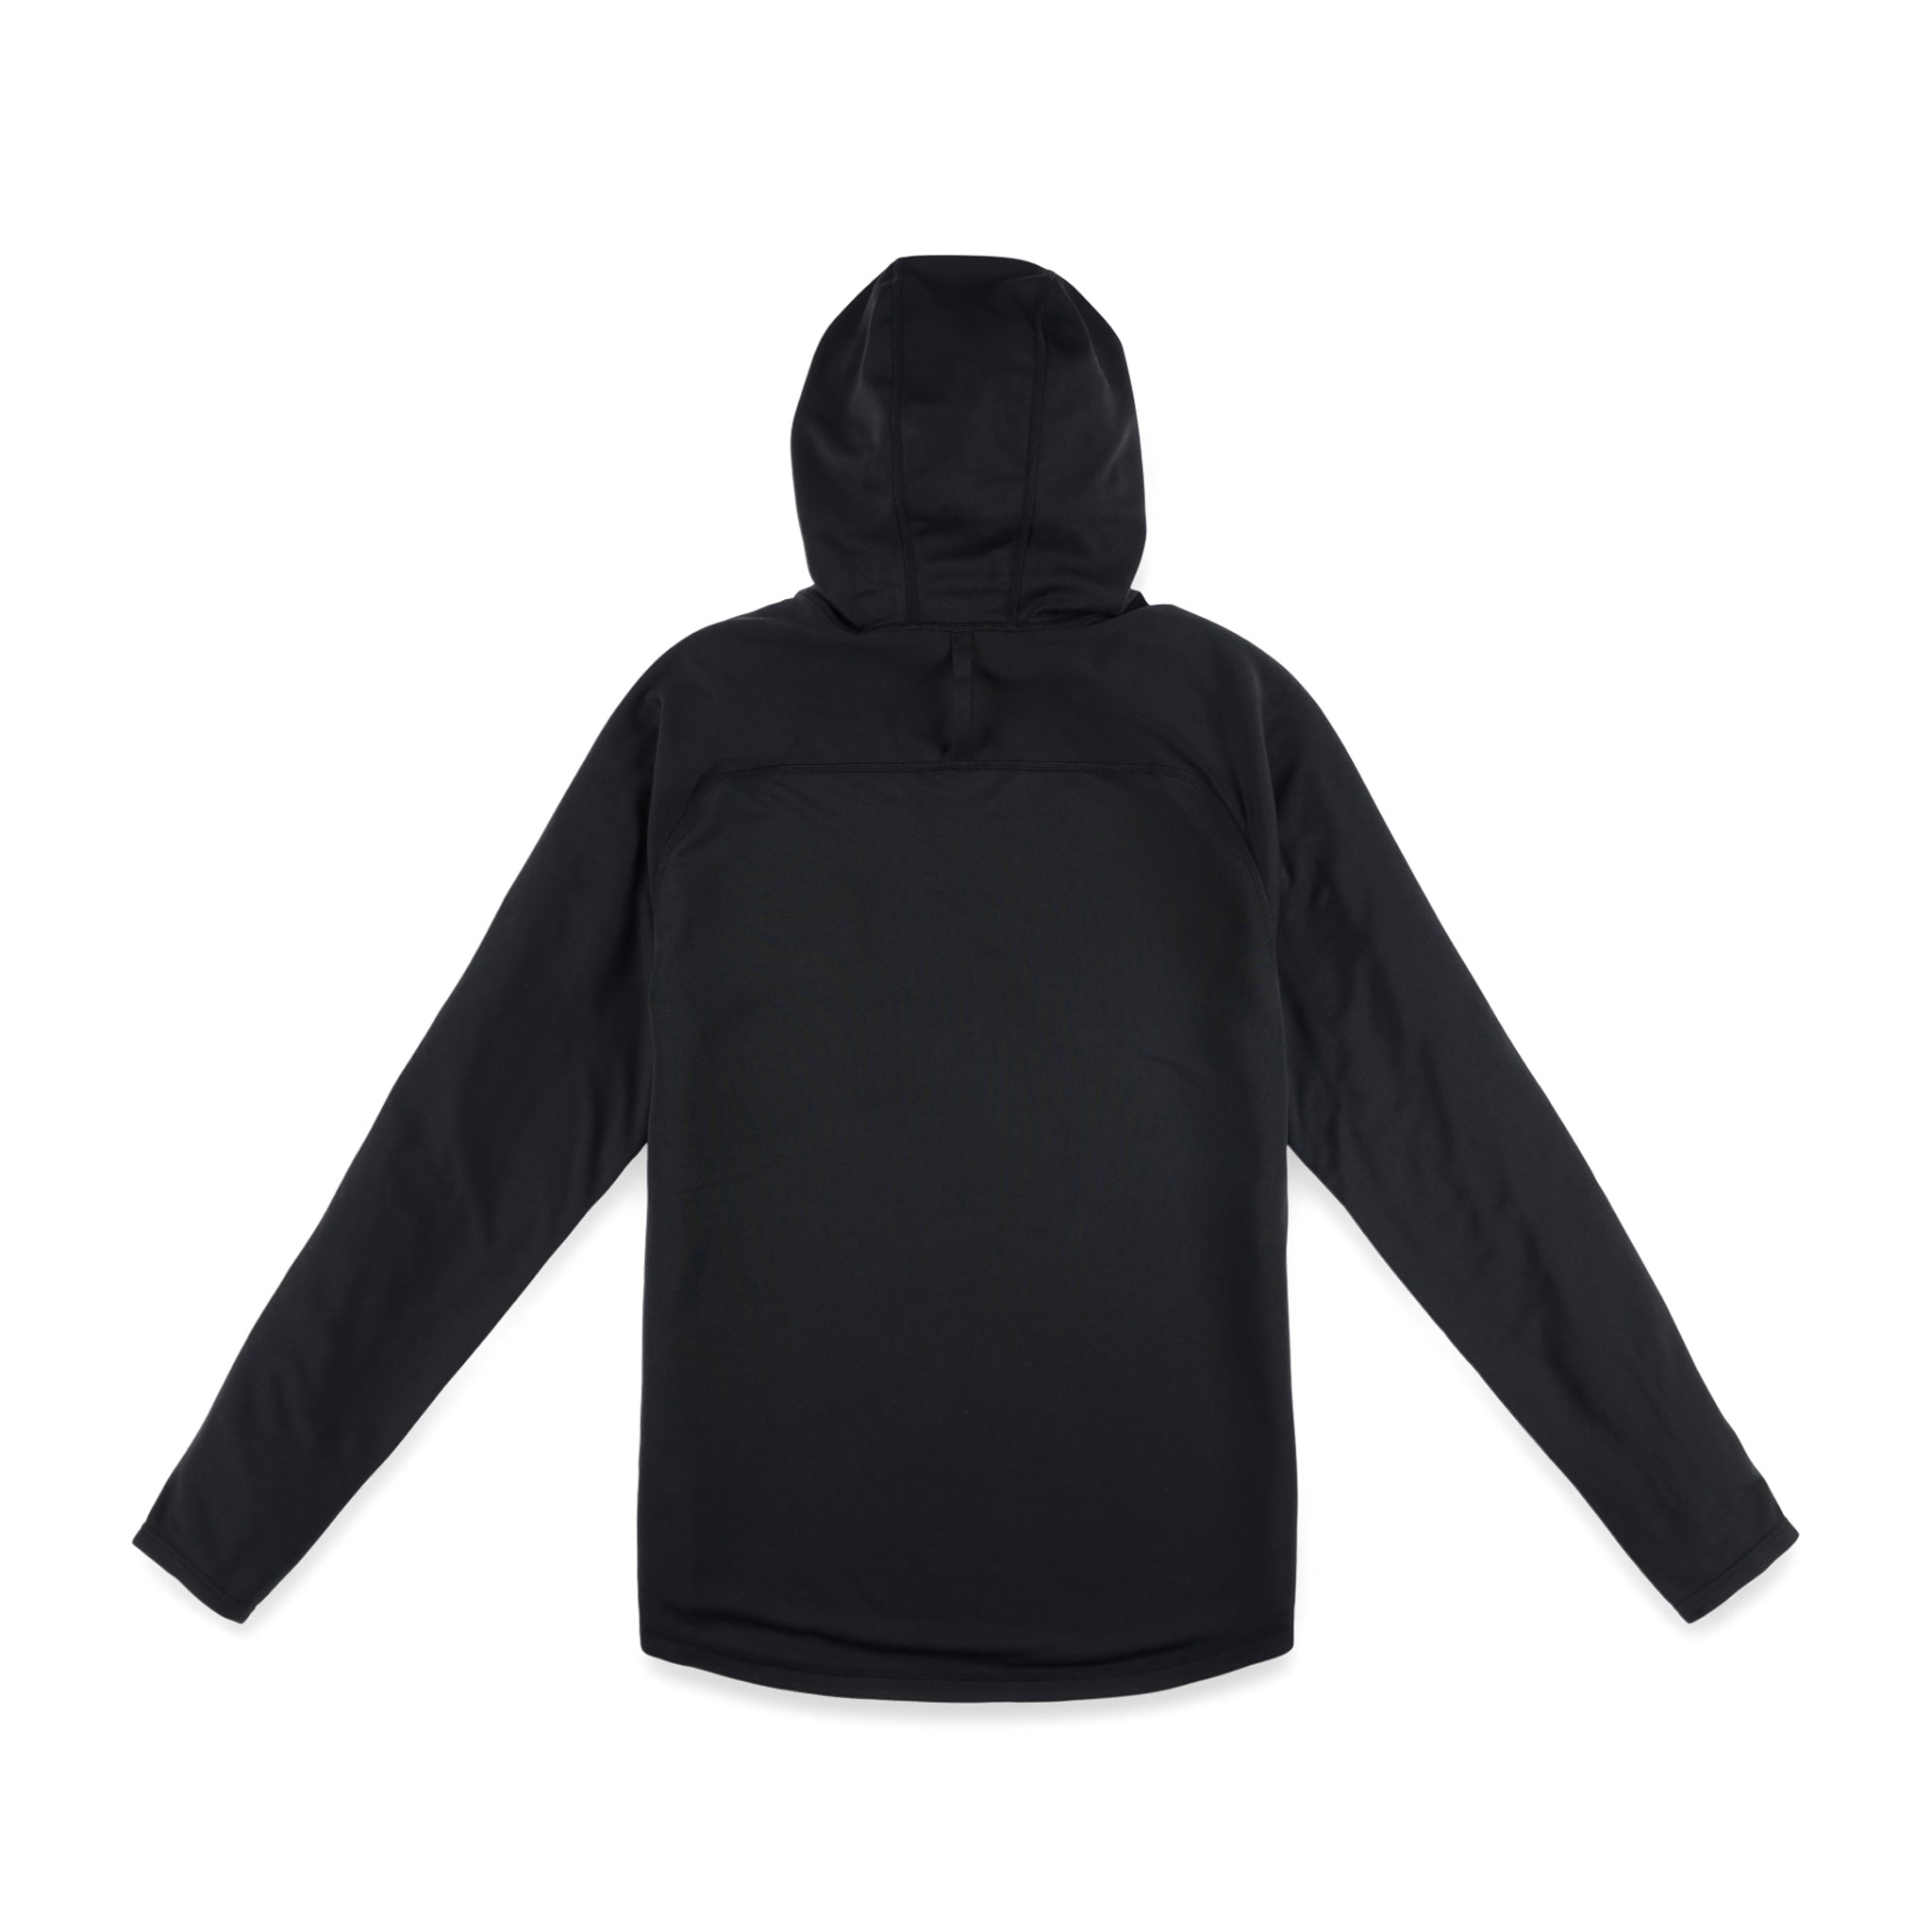 PackFast Packing Band on back of Topo Designs Men's River Hoodie 30+ UPF moisture wicking quick dry top in "Black".